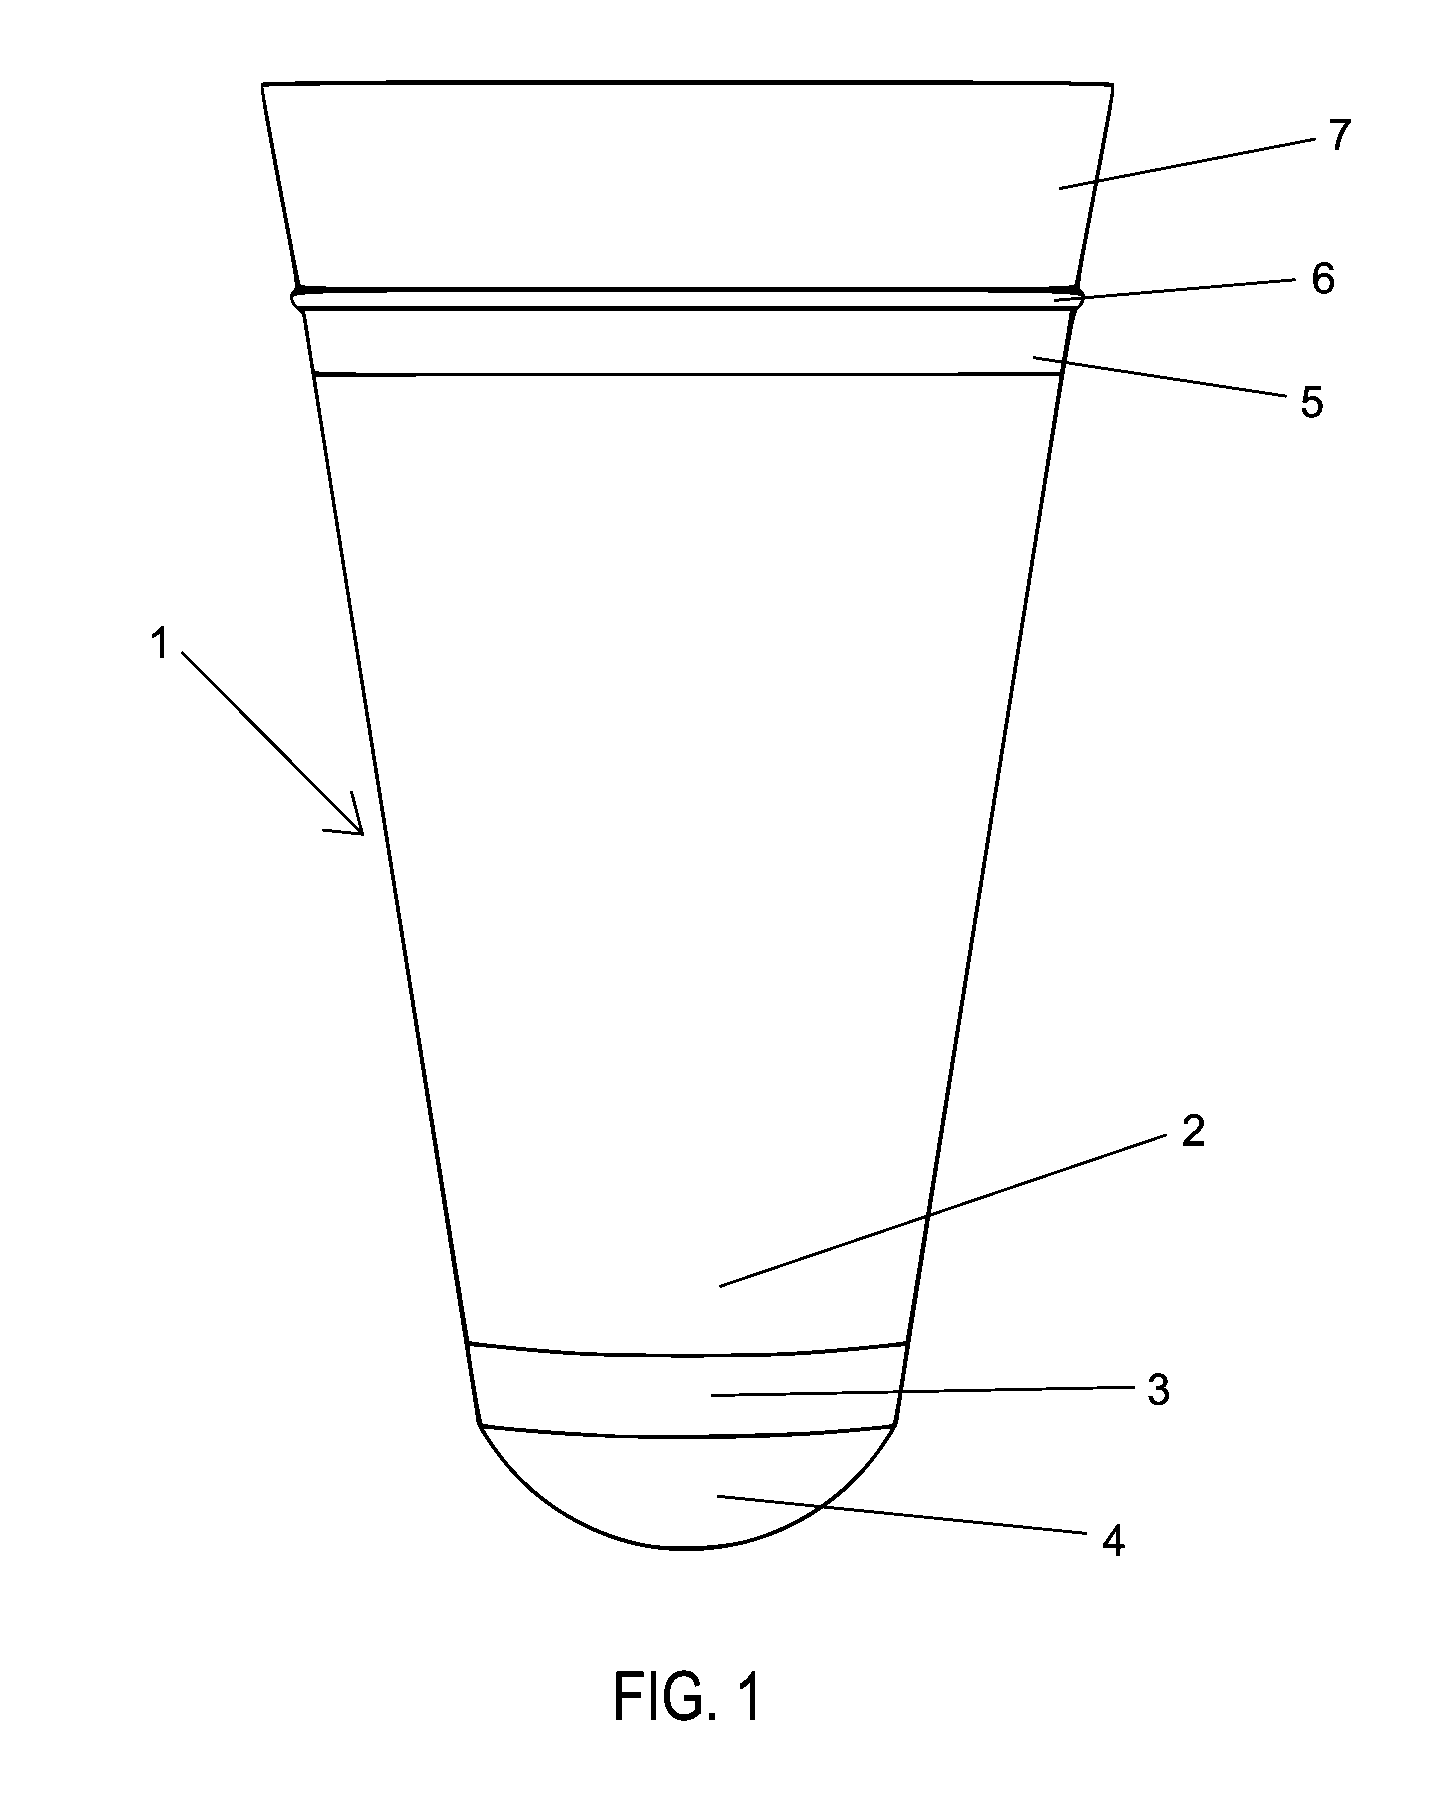 Negative gauge pressure dynamic convection system for artificial limb and associated methods